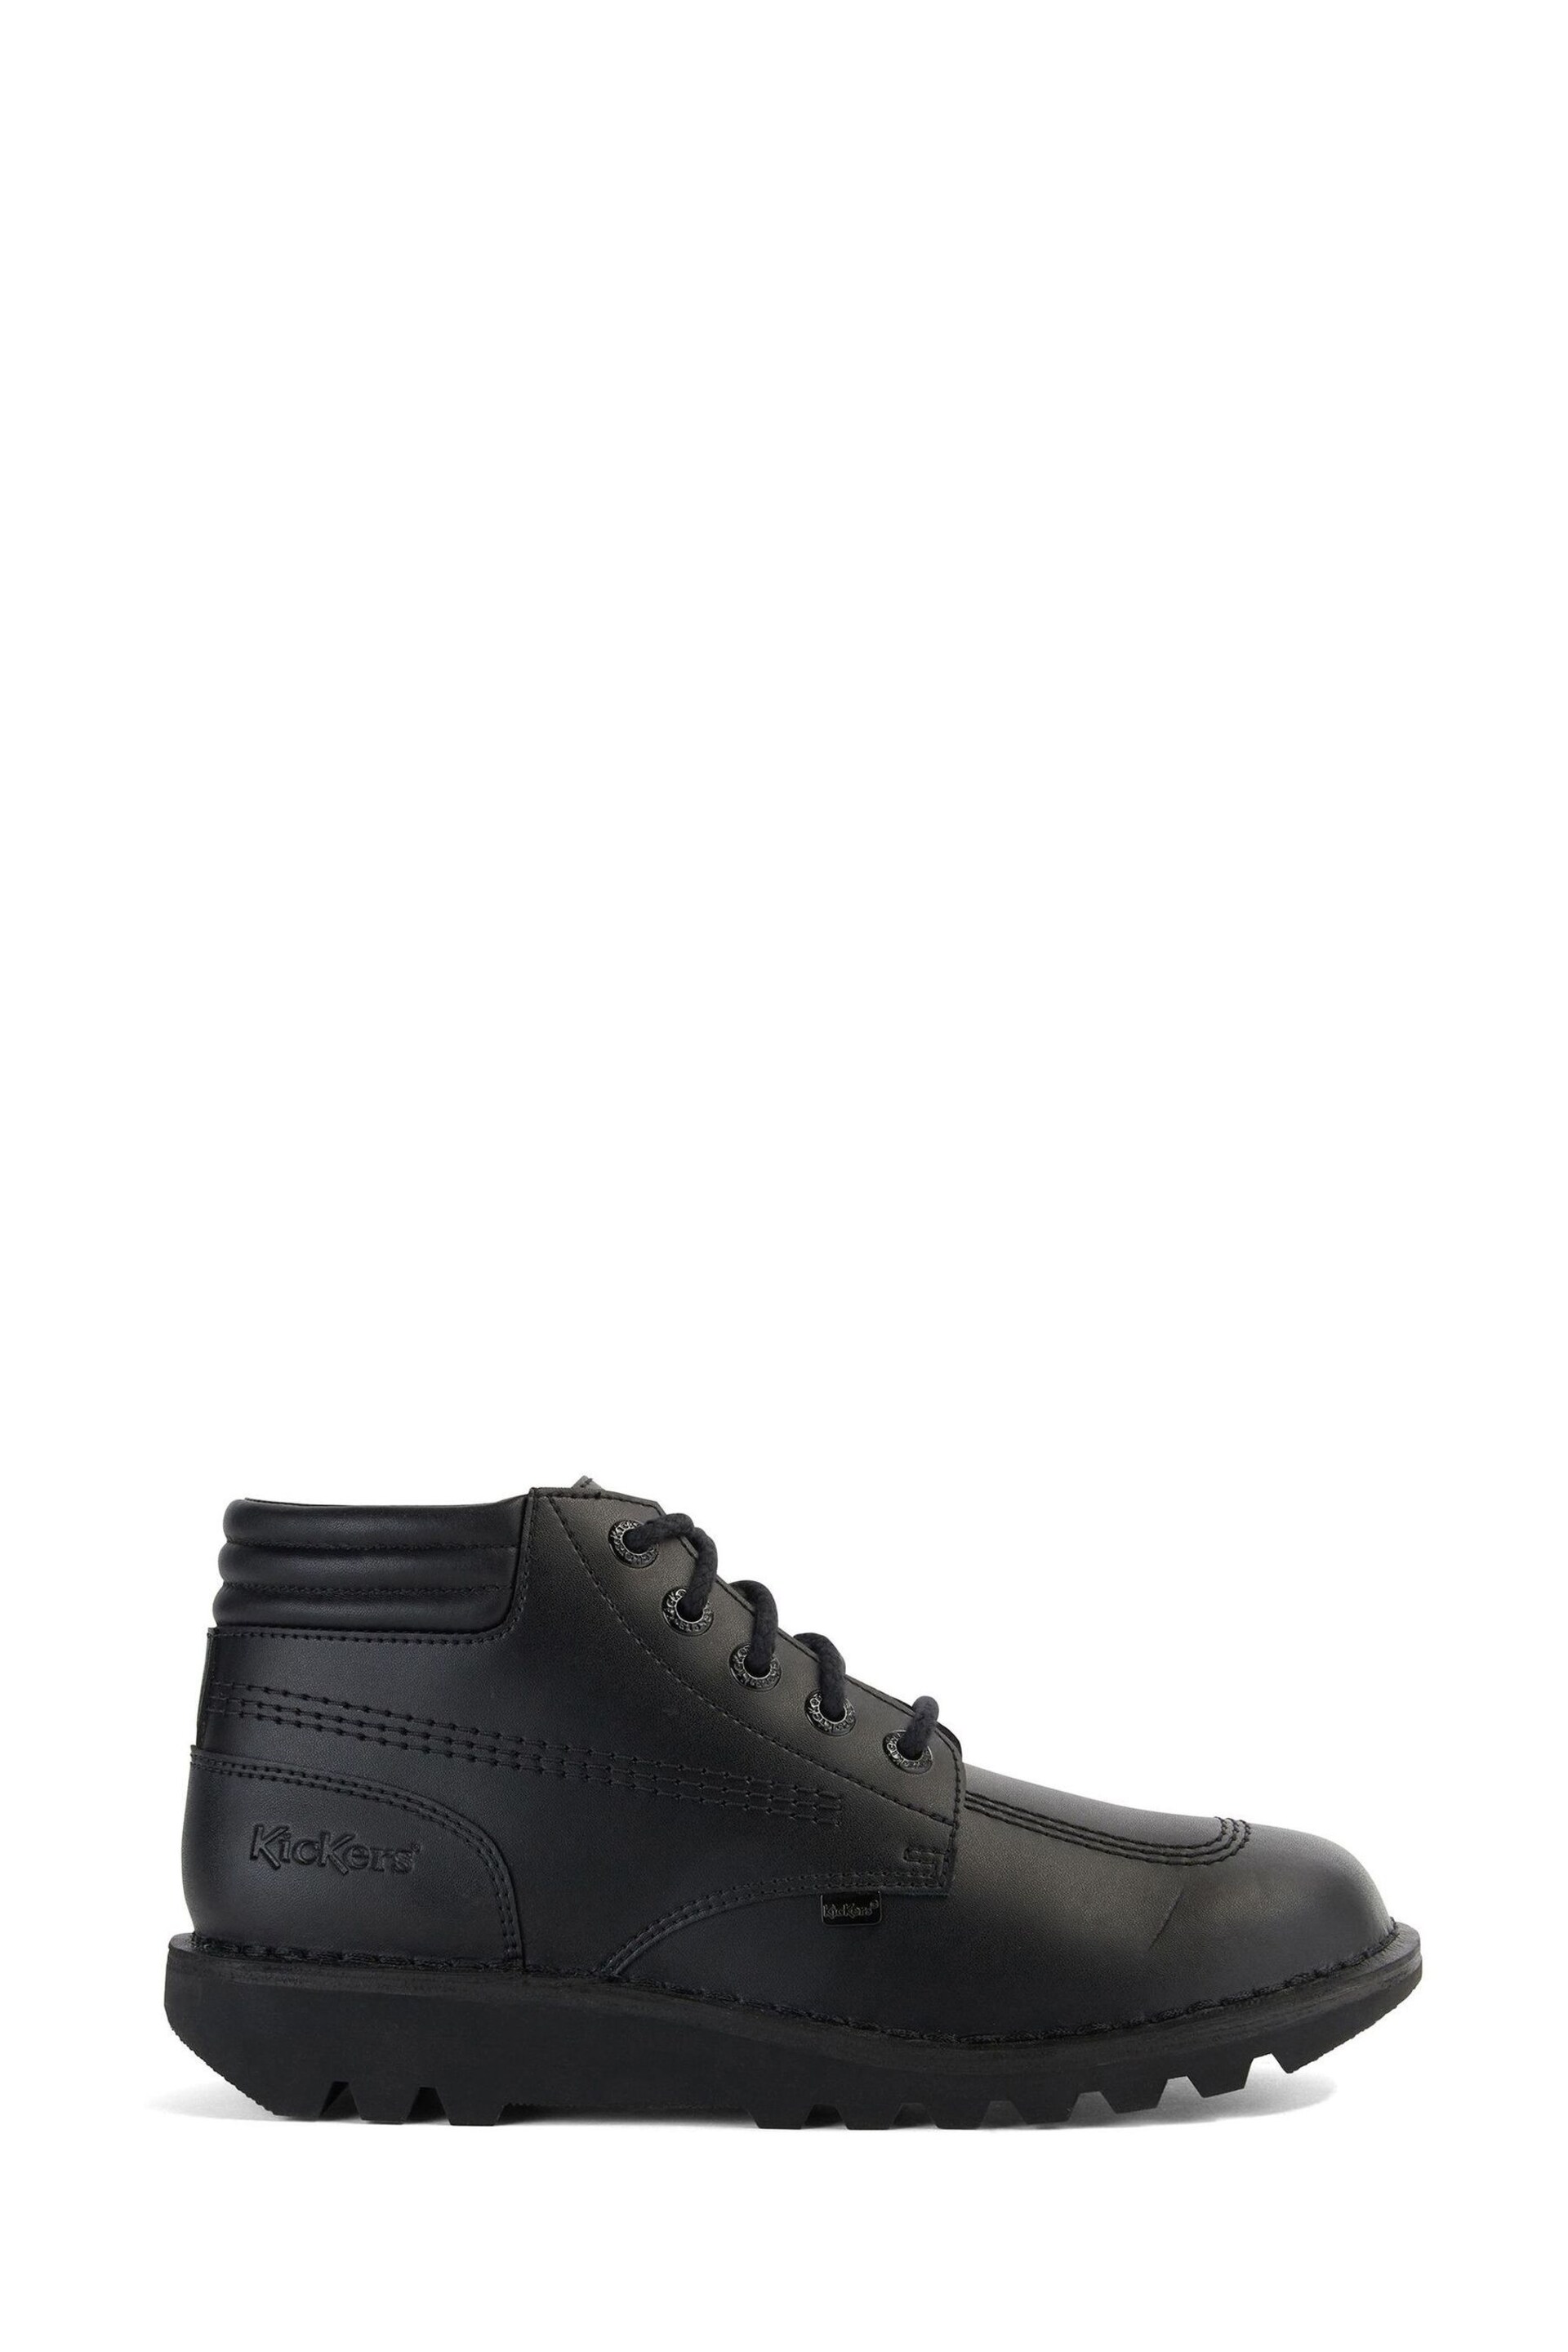 Kickers Kick Hi Padded Leather Boots - Image 1 of 6